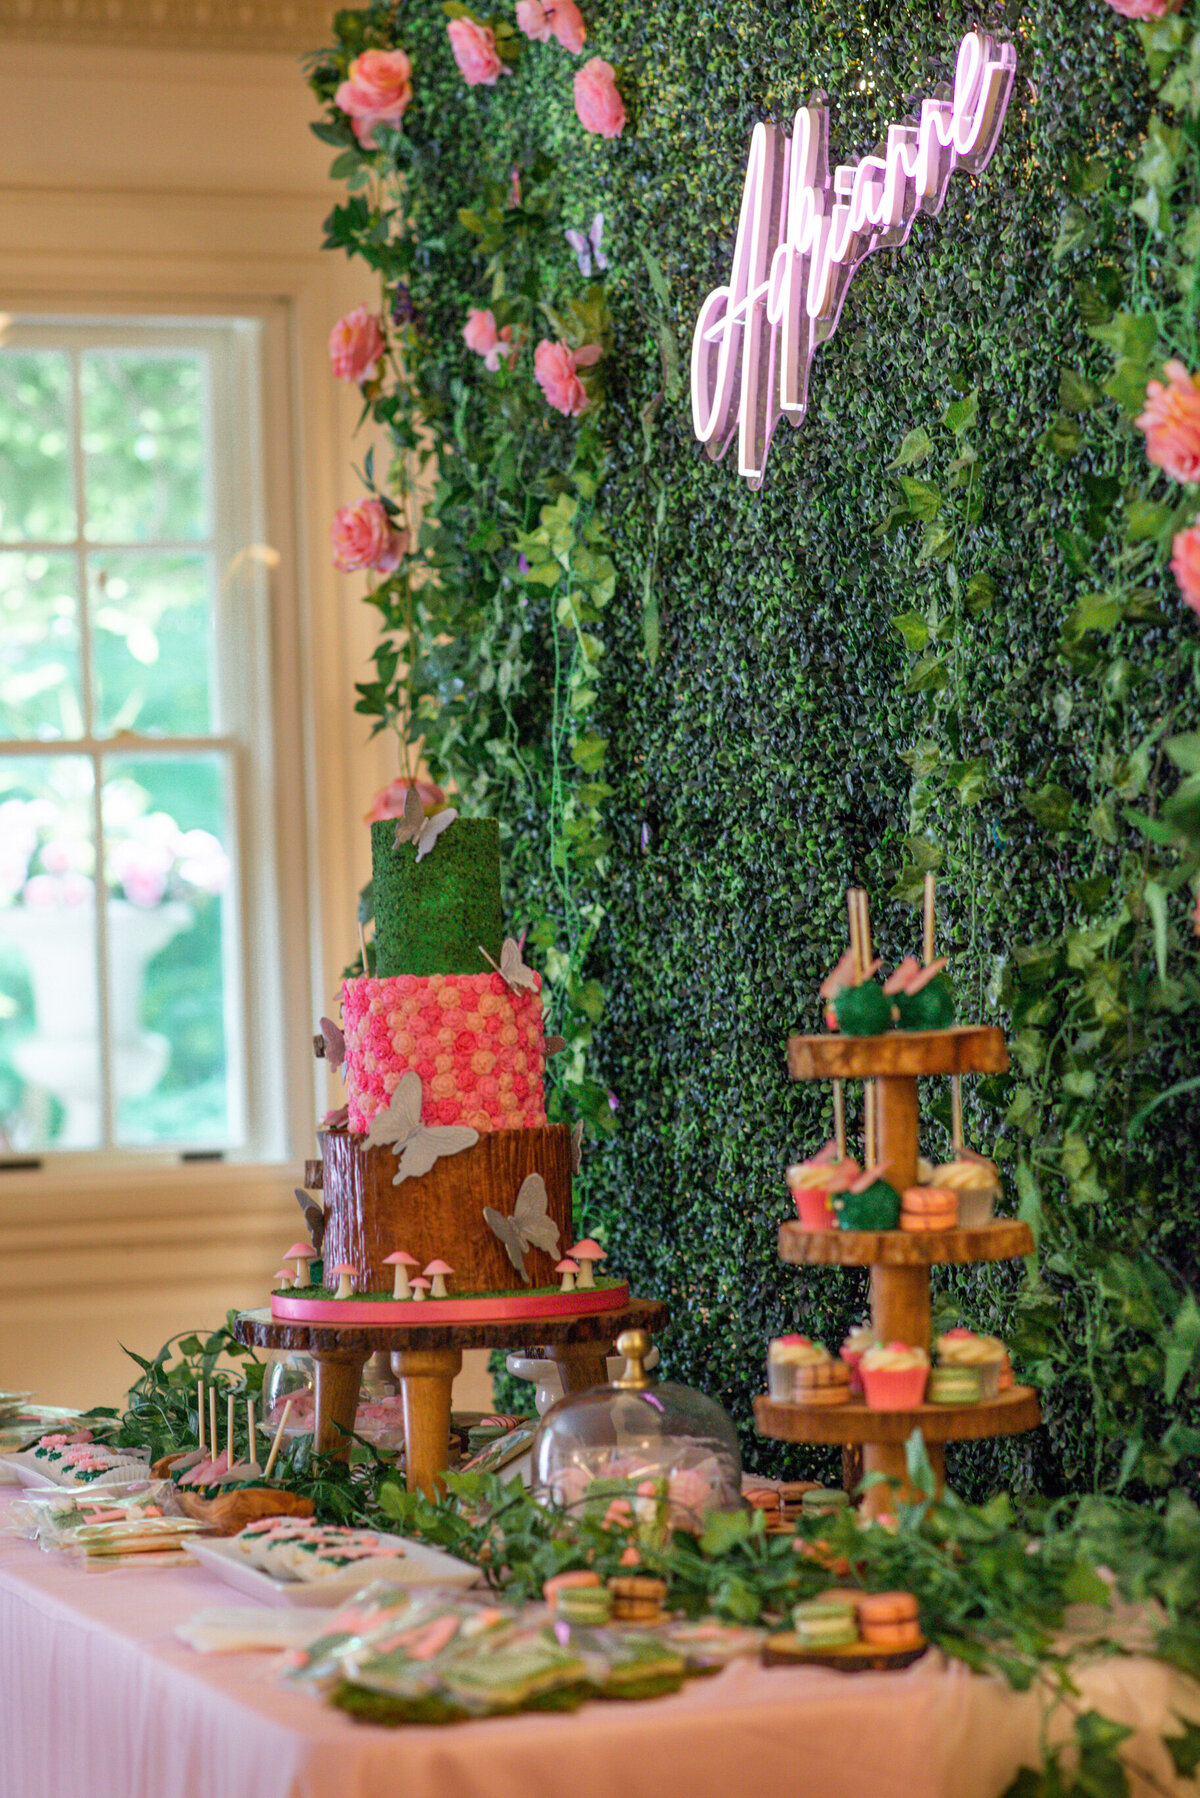 ENCHANTED FOREST BABY SHOWER, IRIODENDRON MANSION